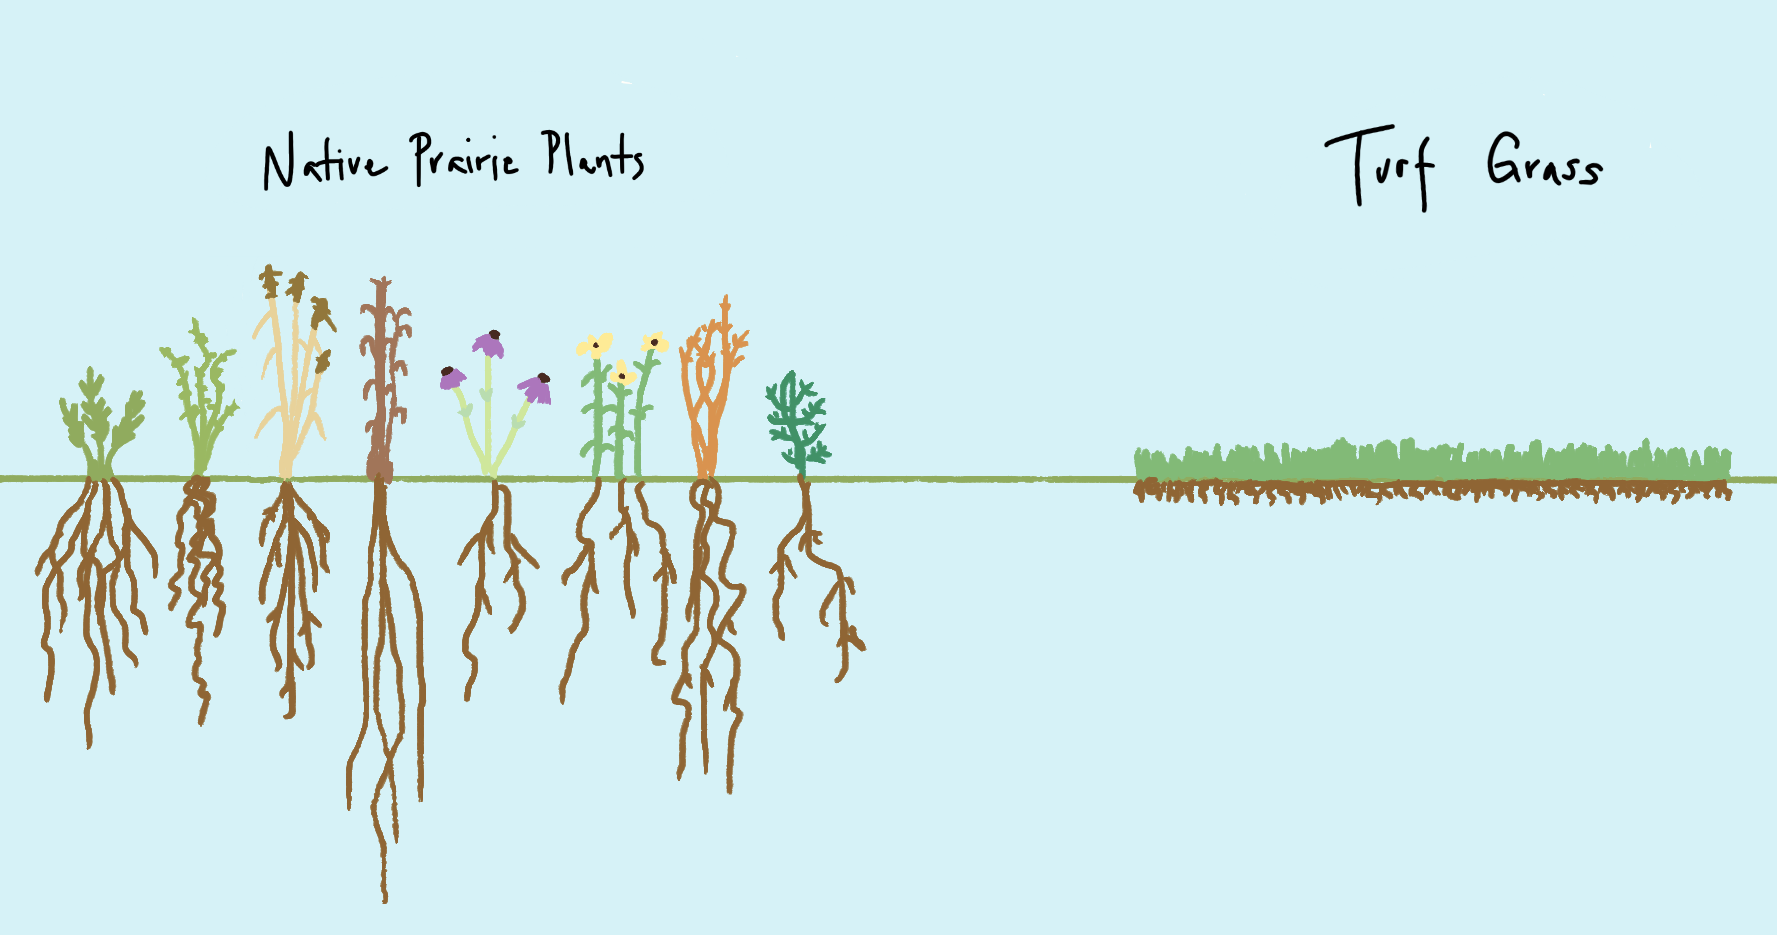 Illustration showing deep roots of prairie plants vs the shallow roots of turf grass